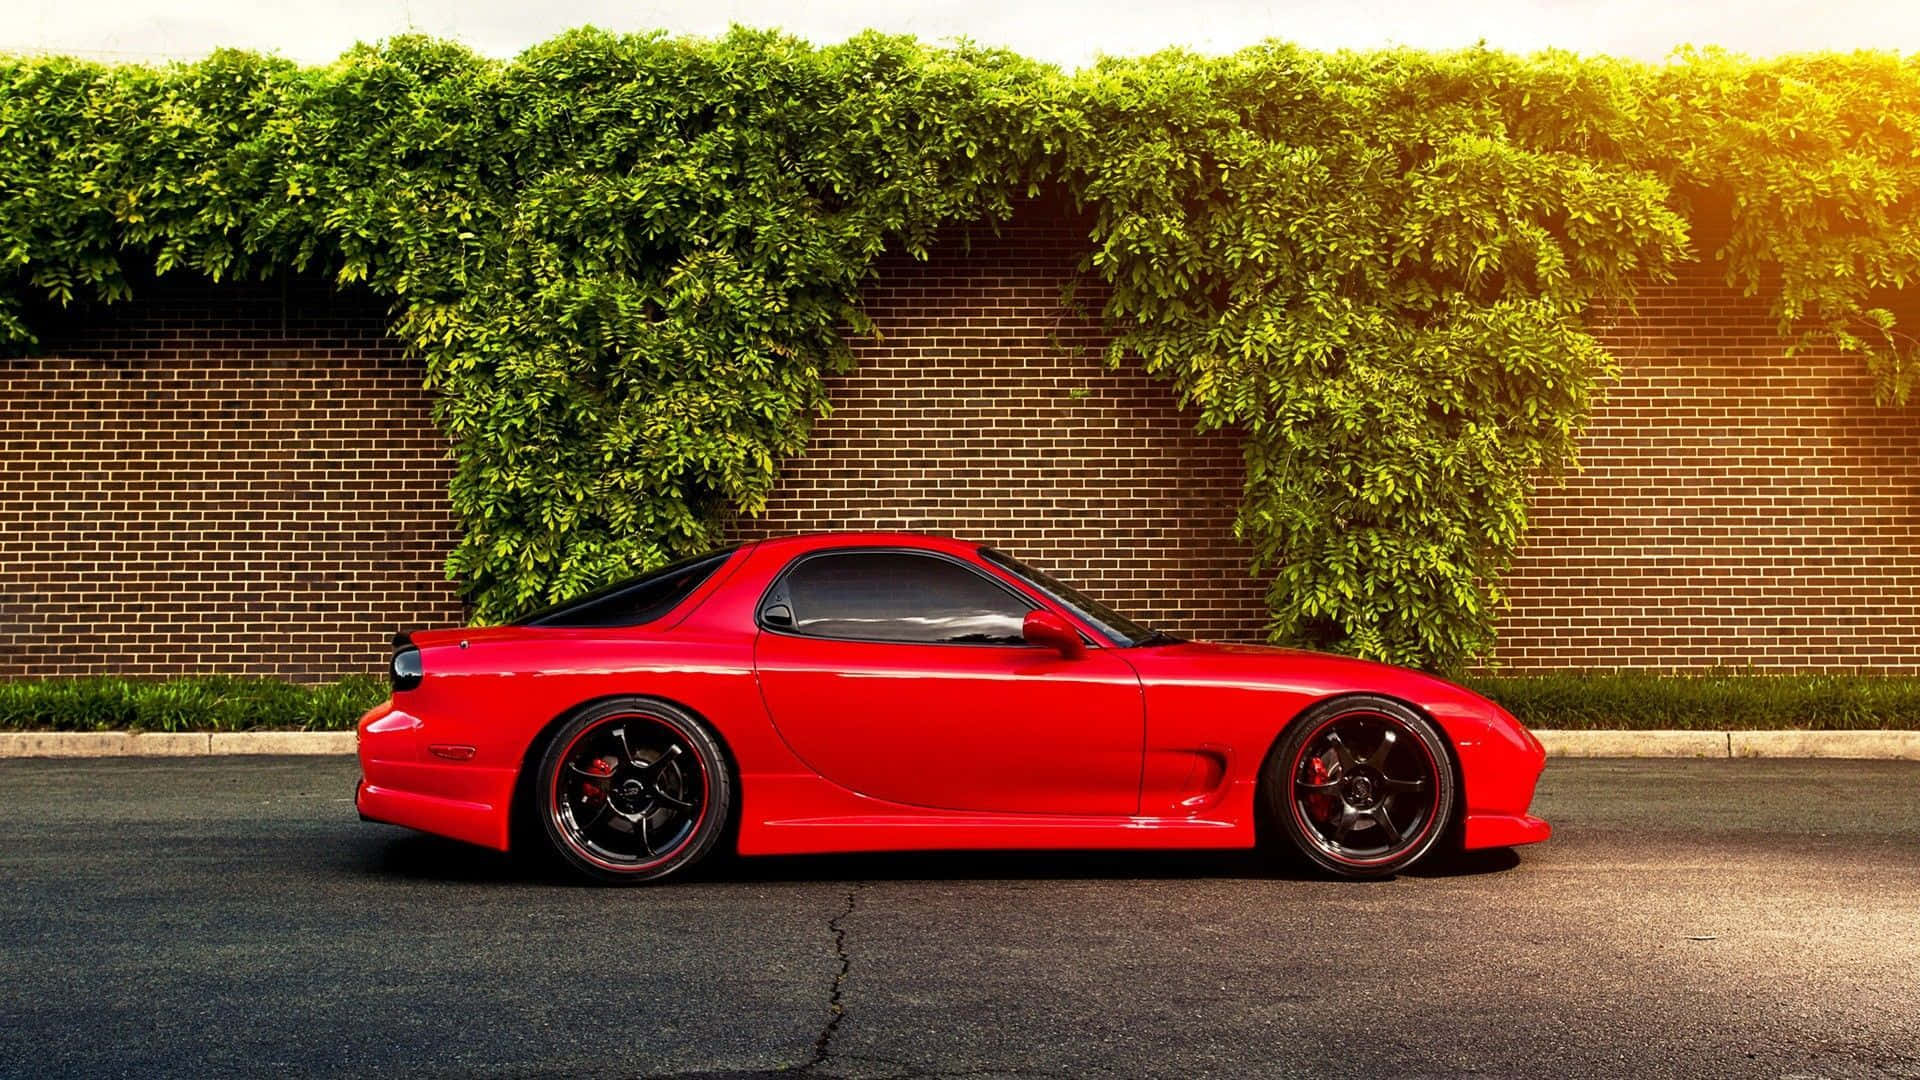 40 Mazda RX7 HD Wallpapers and Backgrounds